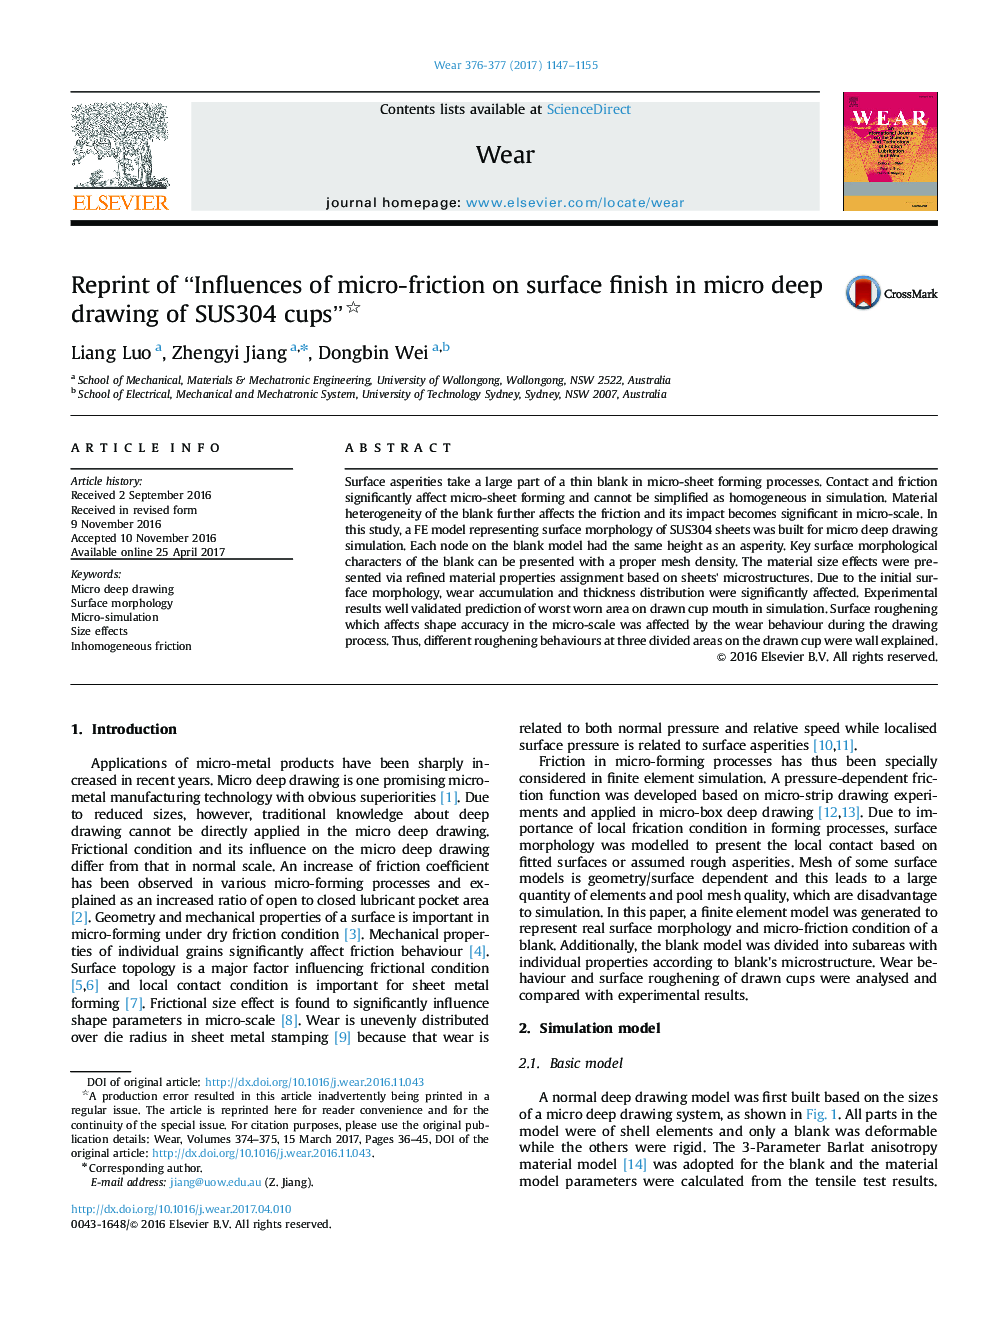 Reprint of ''Influences of micro-friction on surface finish in micro deep drawing of SUS304 cups''